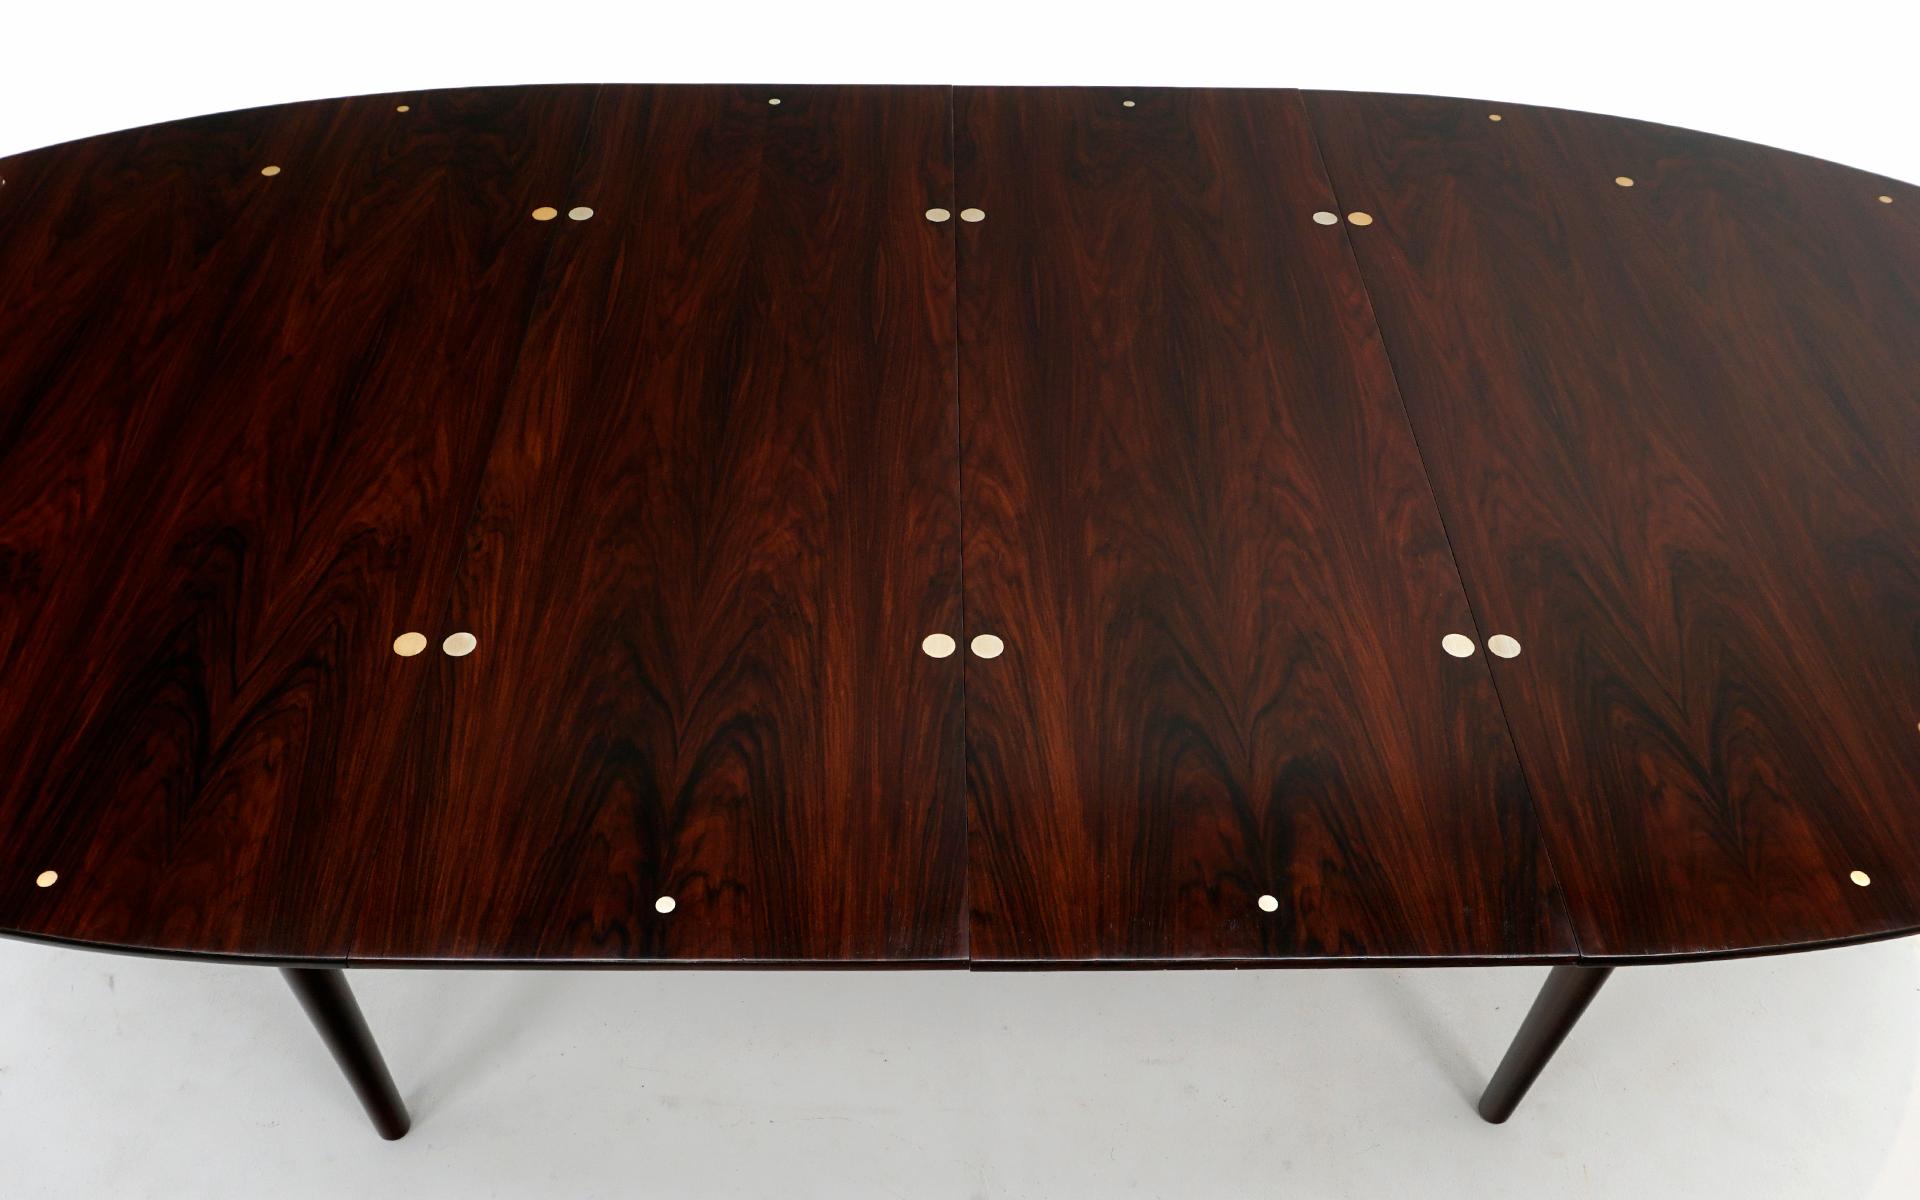 Finn Juhl Judas Dining Table for Niels Vodder, Brazilian Rosewood, Silver Inlay For Sale 2